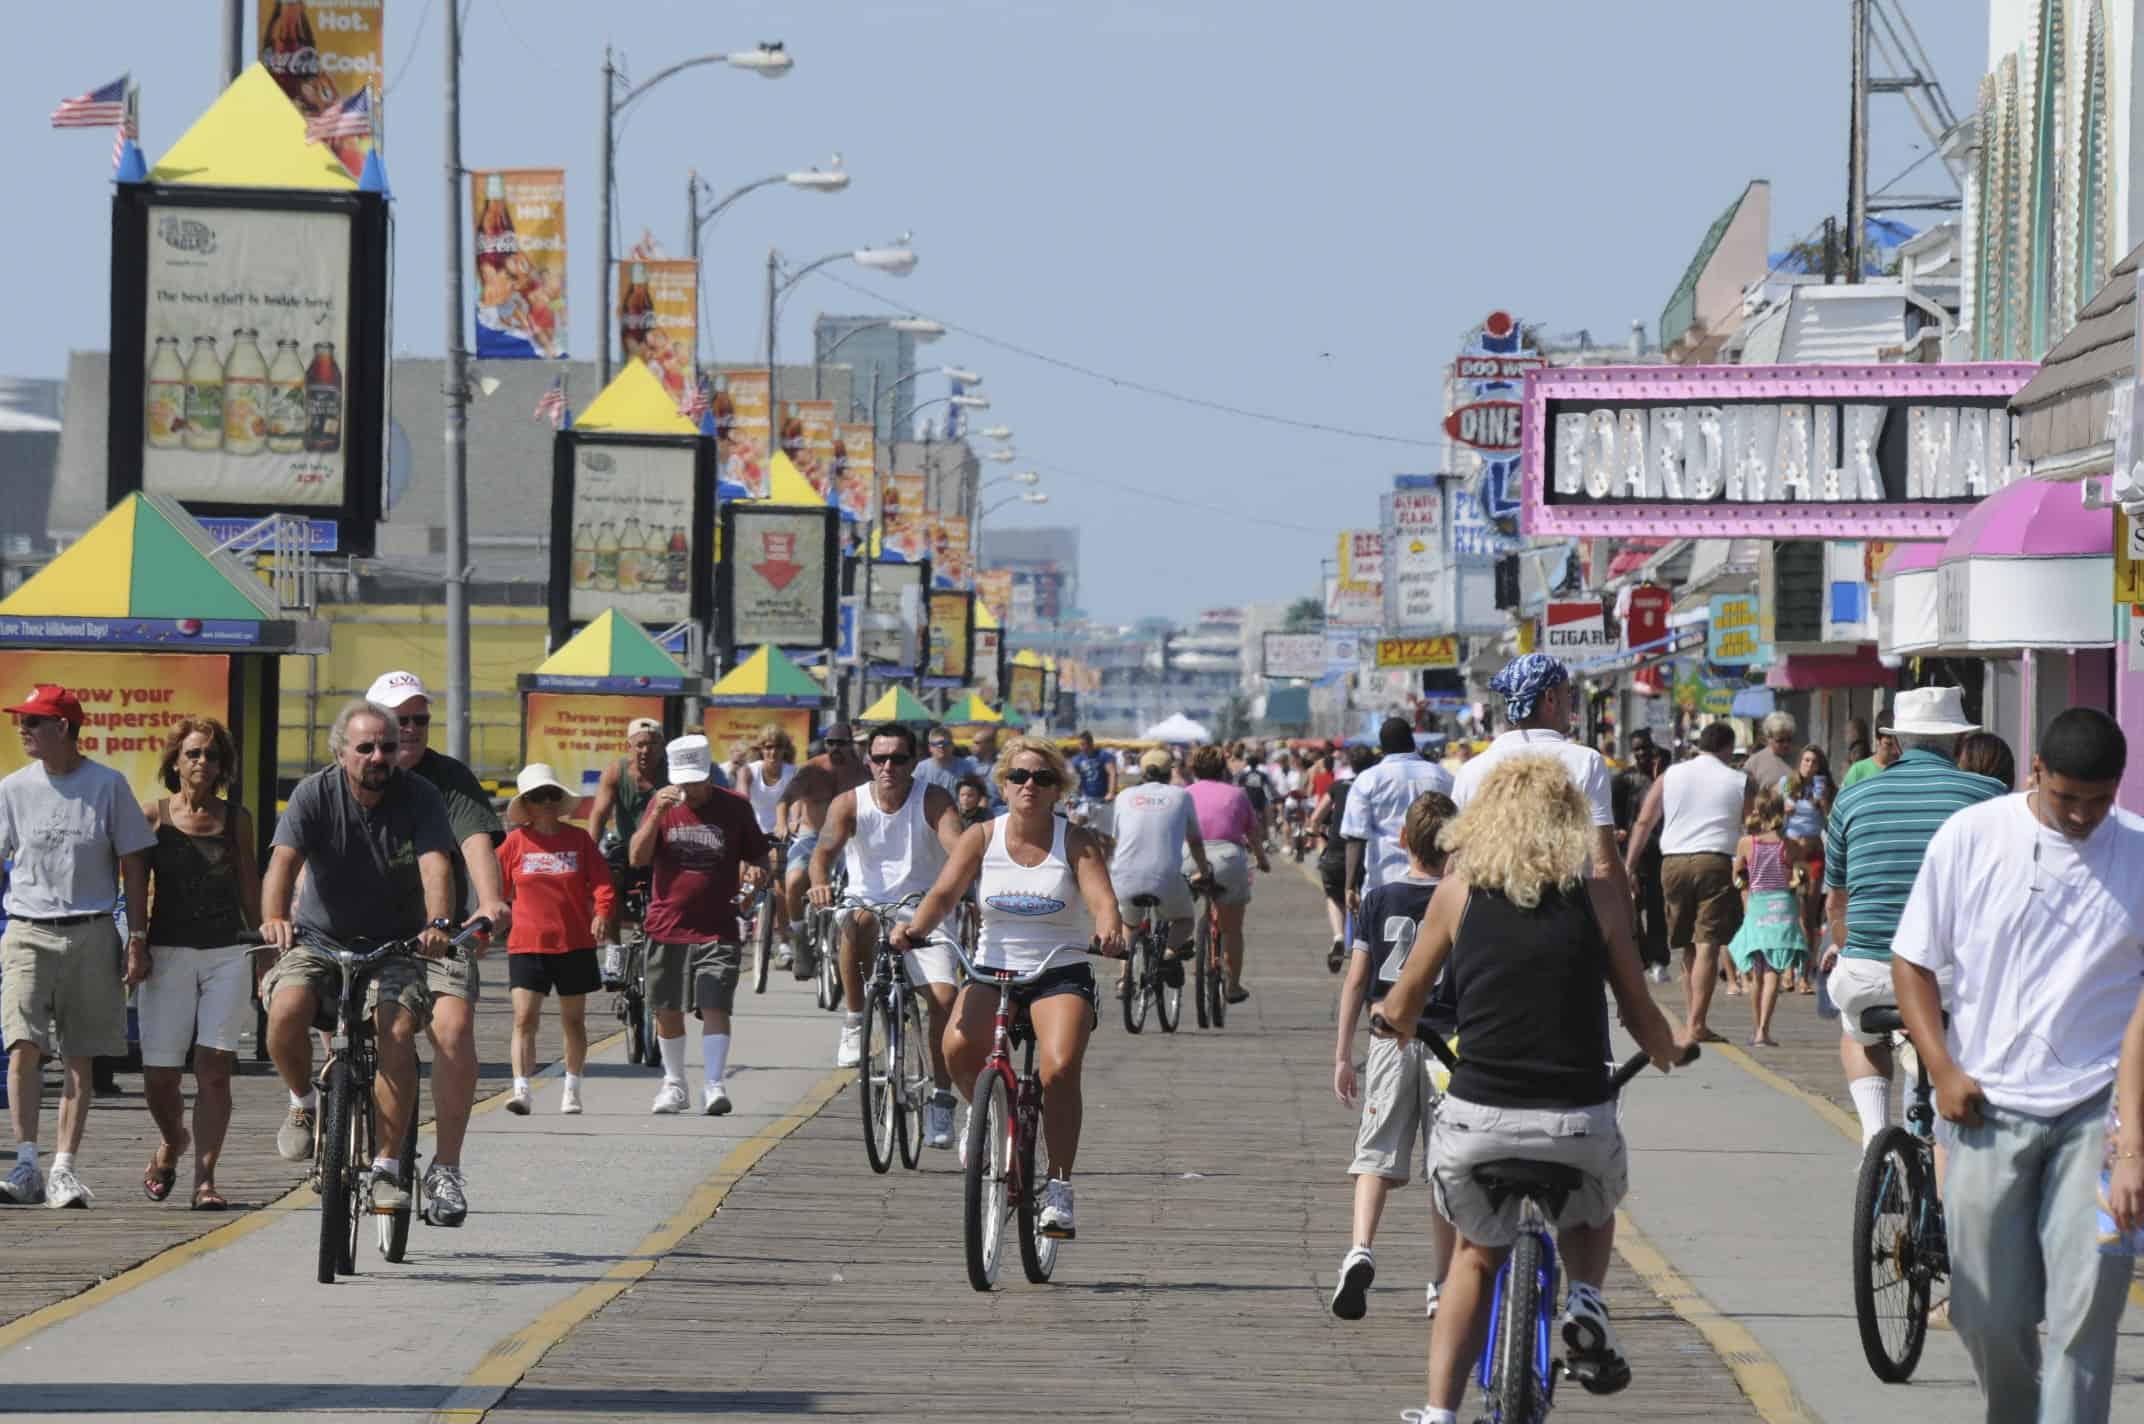 Best things to do in The Wildwoods New Jersey - Priscilla Loomis - Wildwoods World Famous Boardwalk. Photo credit: Greater Wildwoods Tourism Improvement and Development Authority